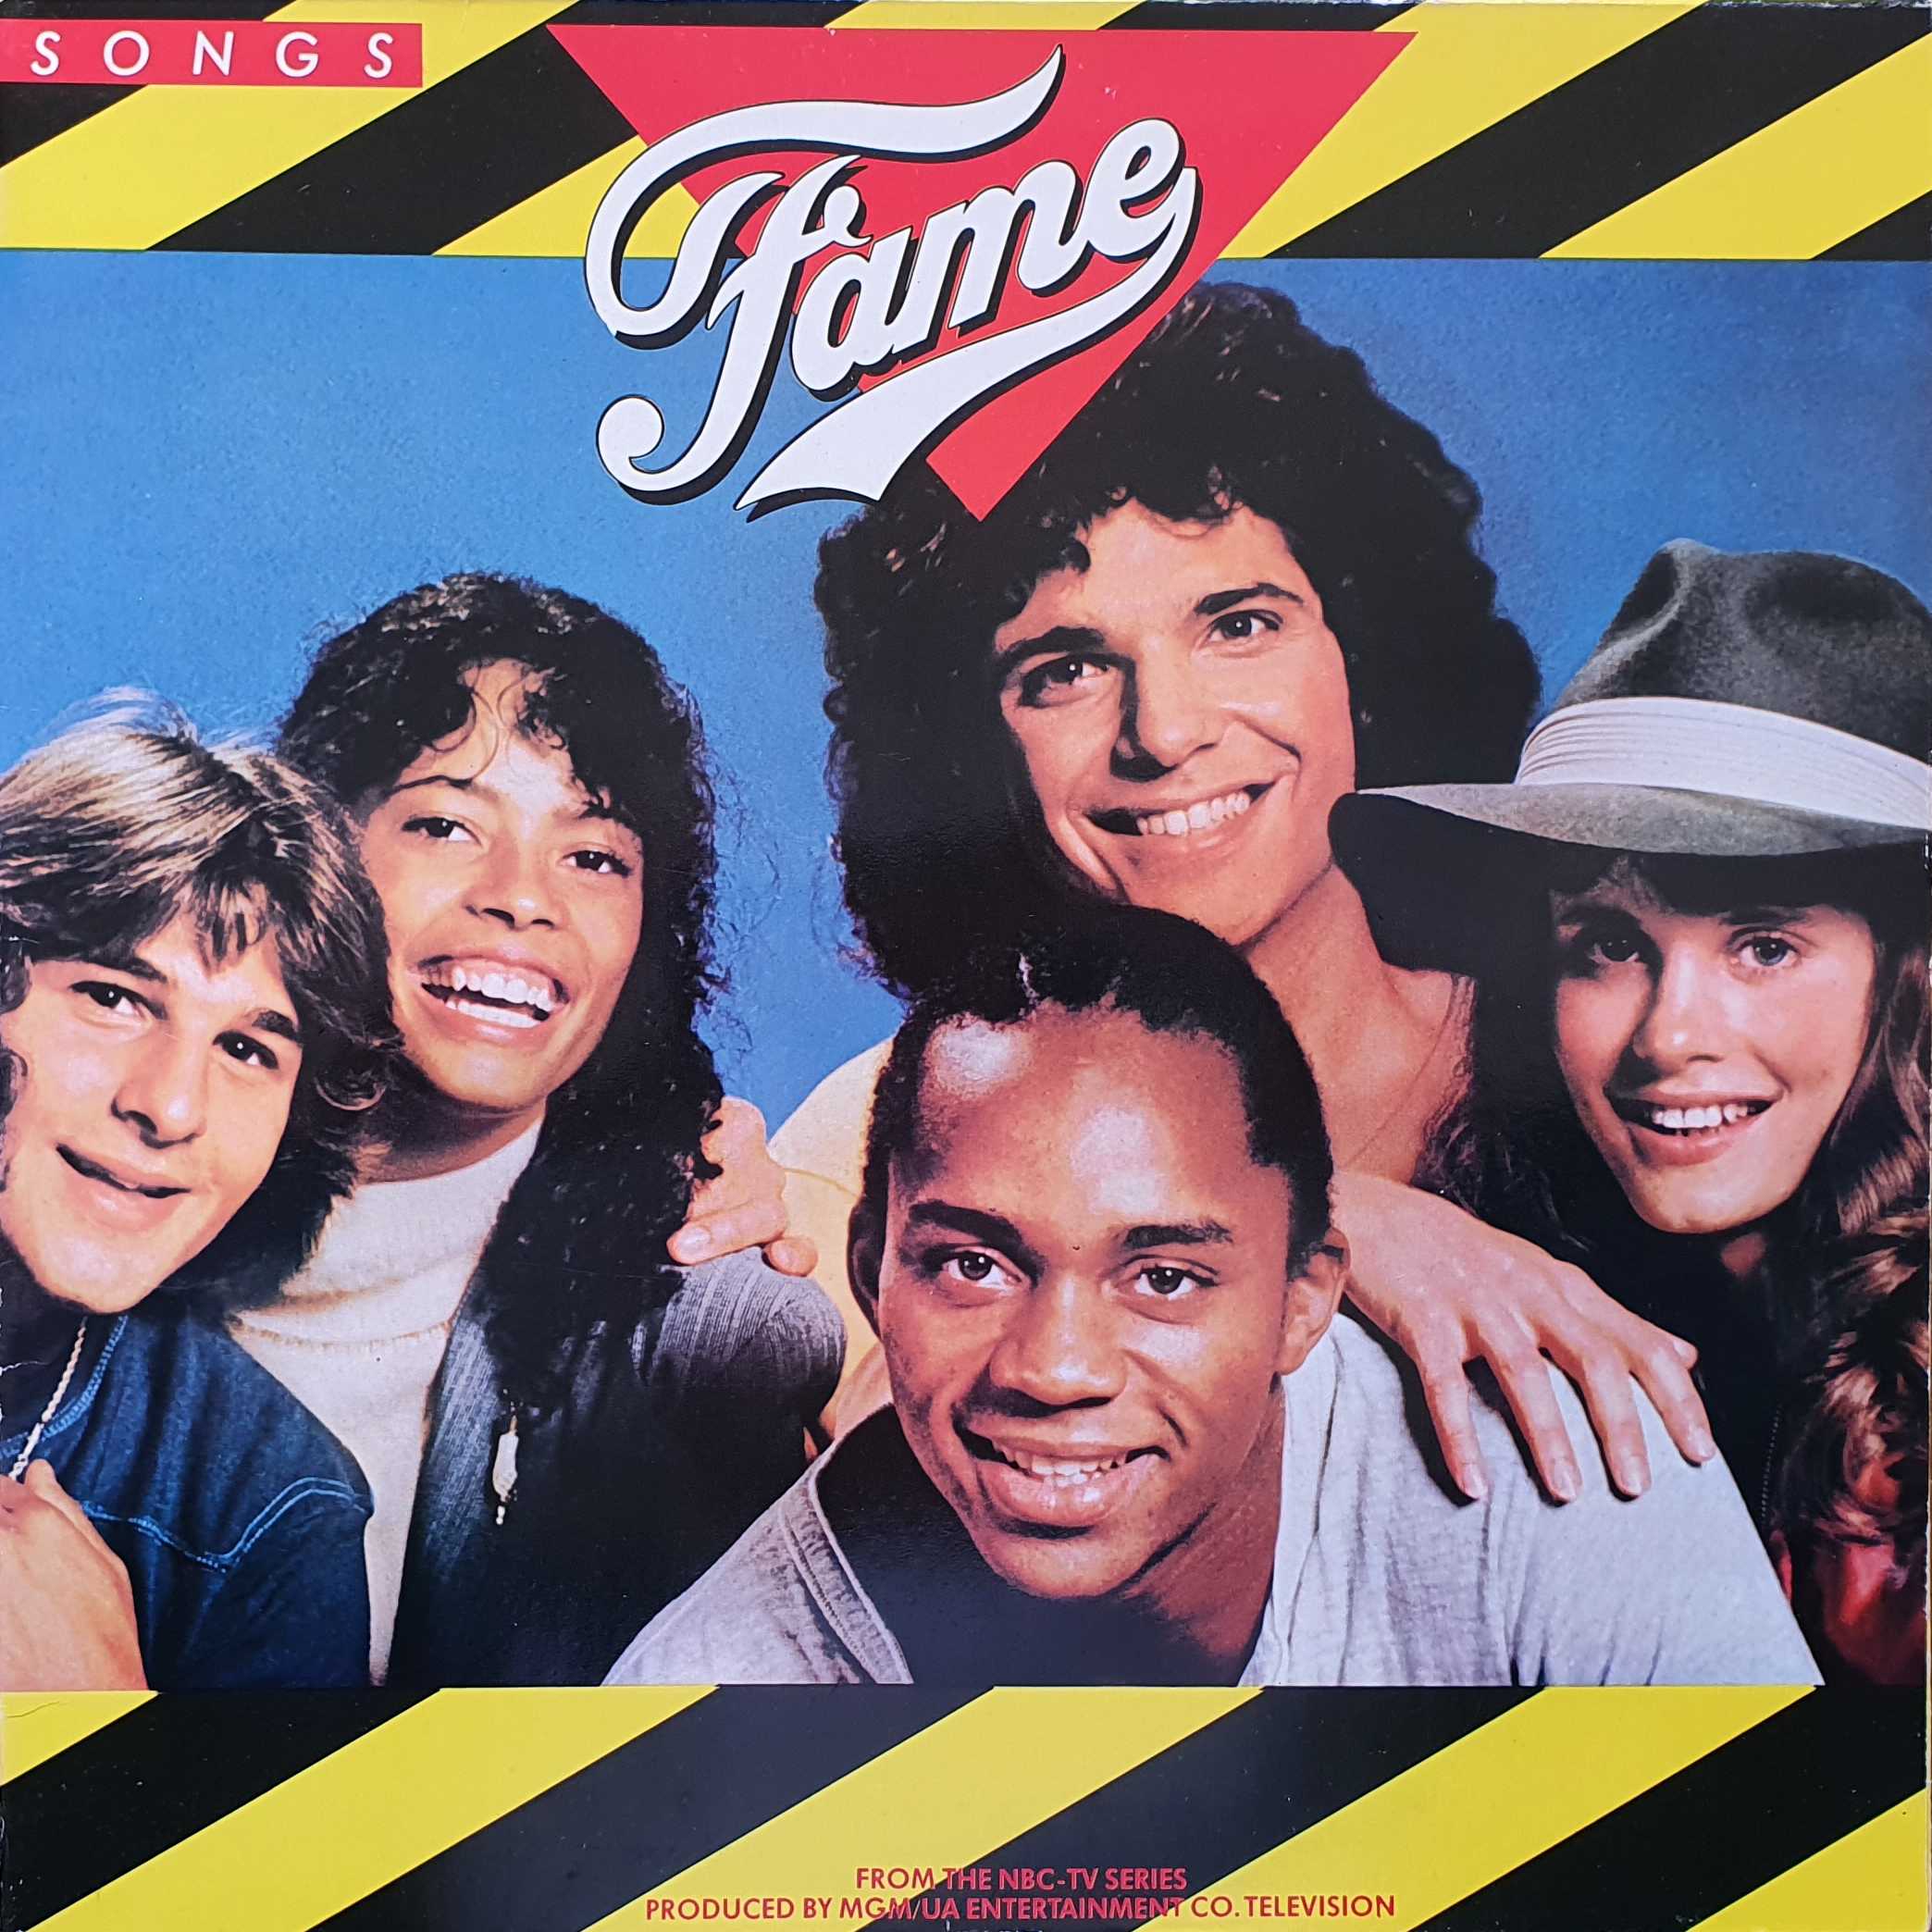 Picture of MAL-RCLP 20267 The kids from fame by artist Various from the BBC albums - Records and Tapes library